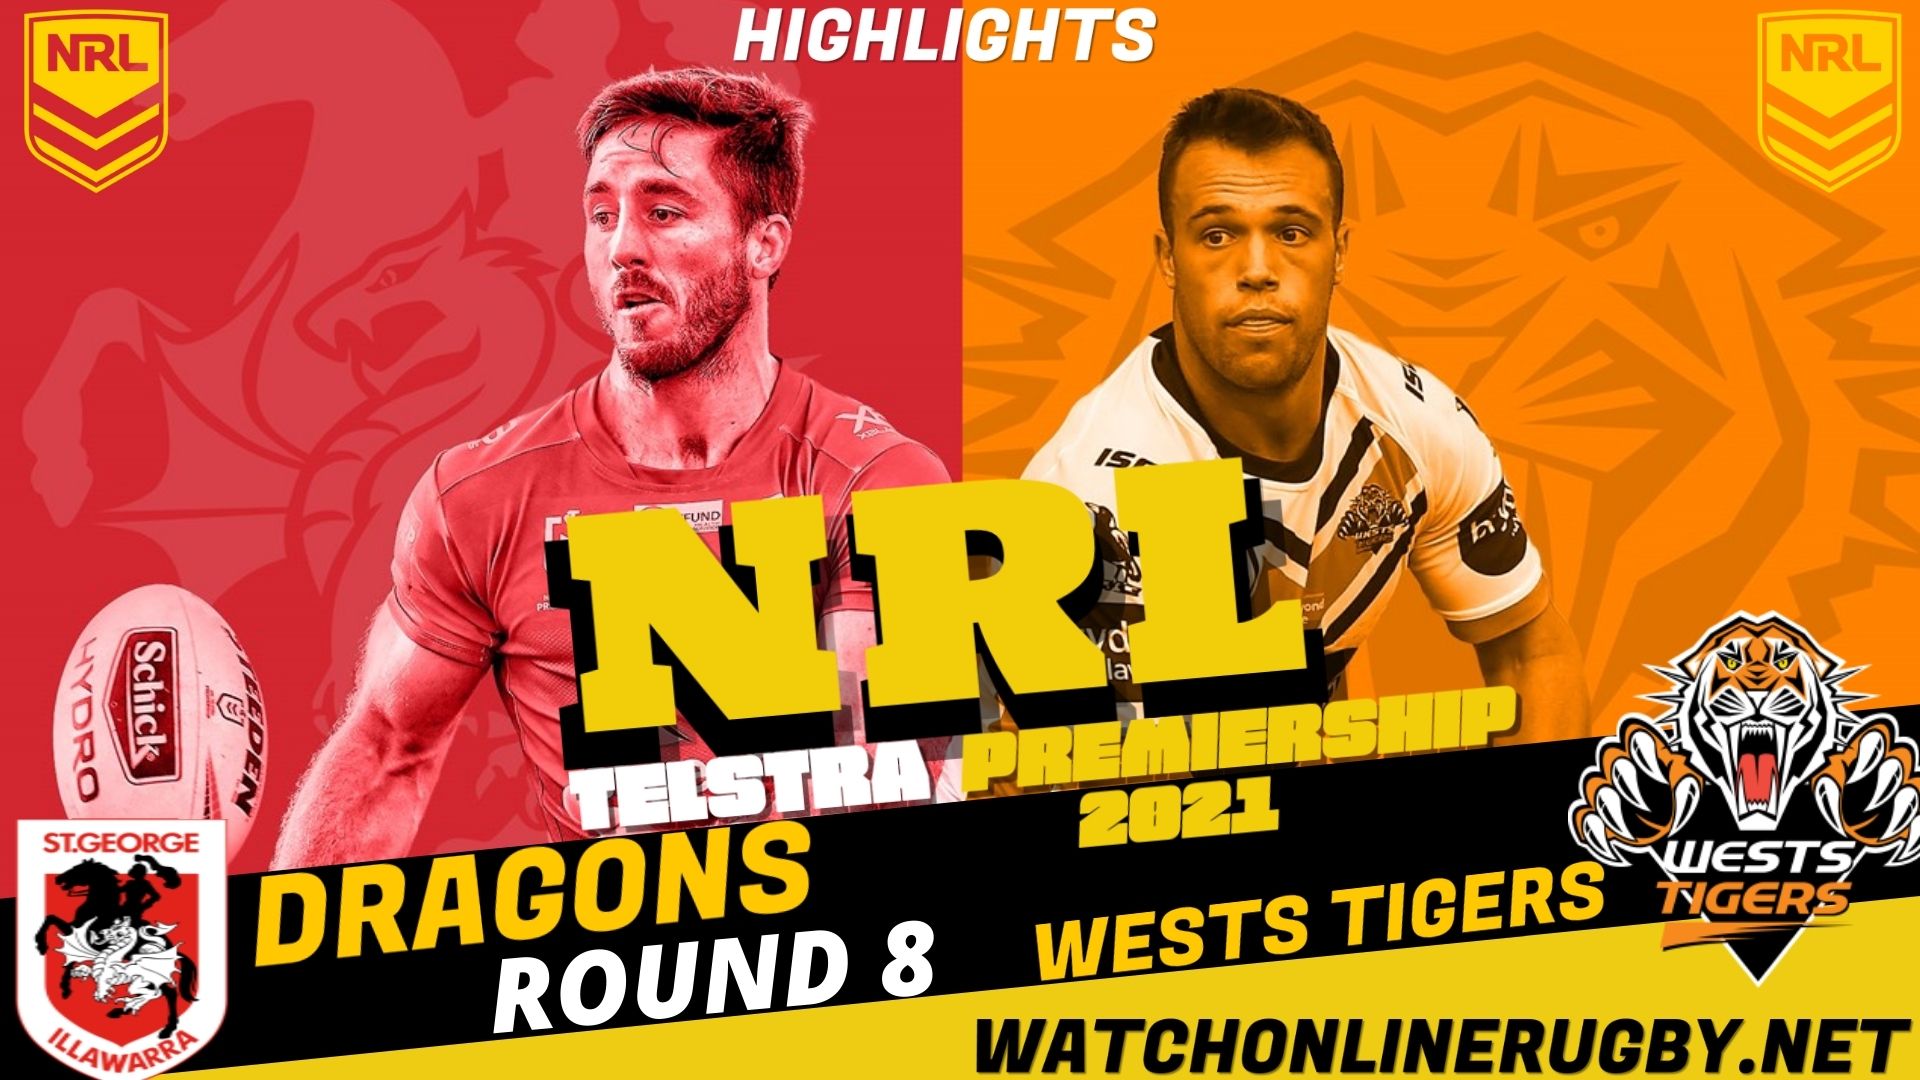 Dragons Vs Wests Tigers Highlights RD 8 NRL Rugby